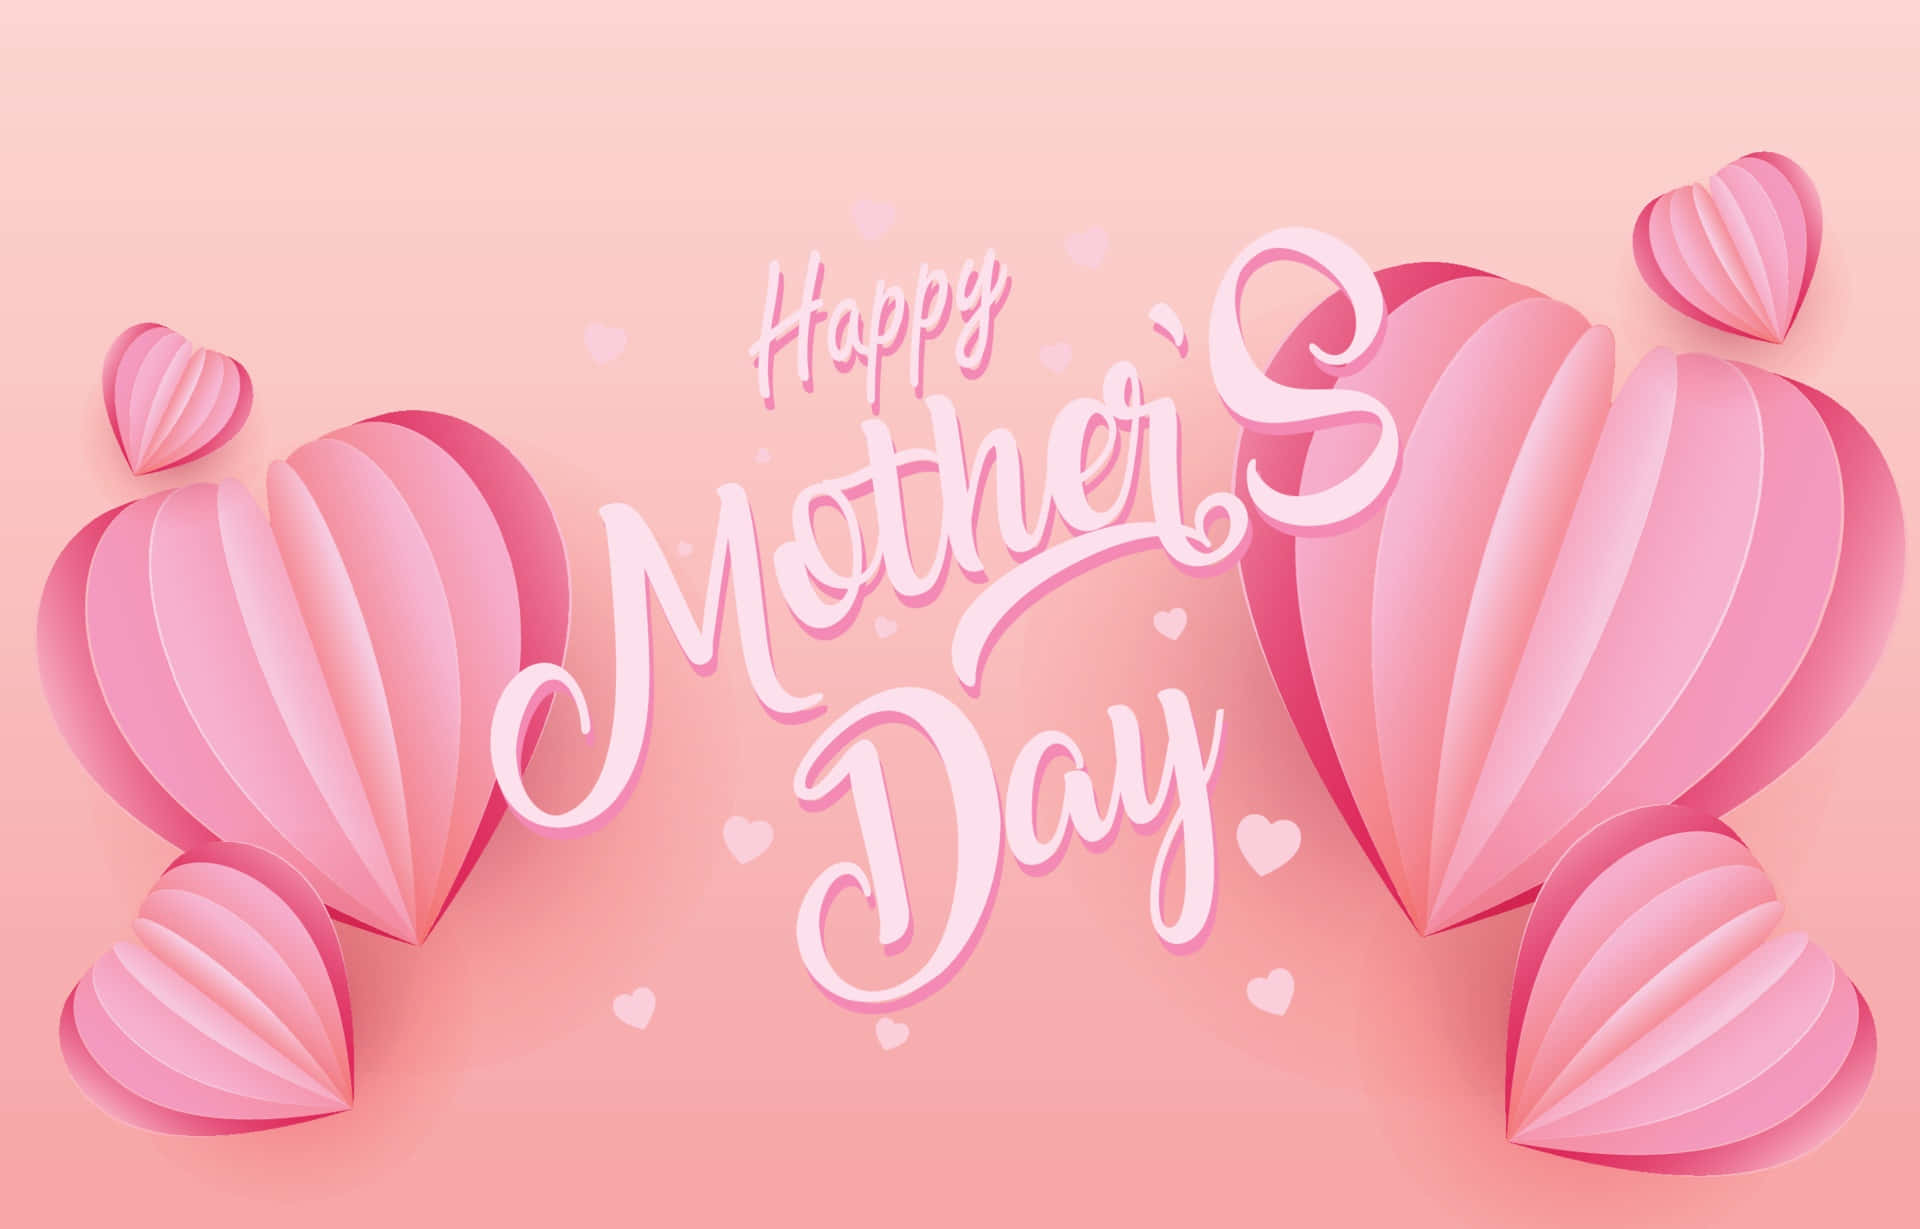 Wishing Every Mother A Very Happy Mothers Day!